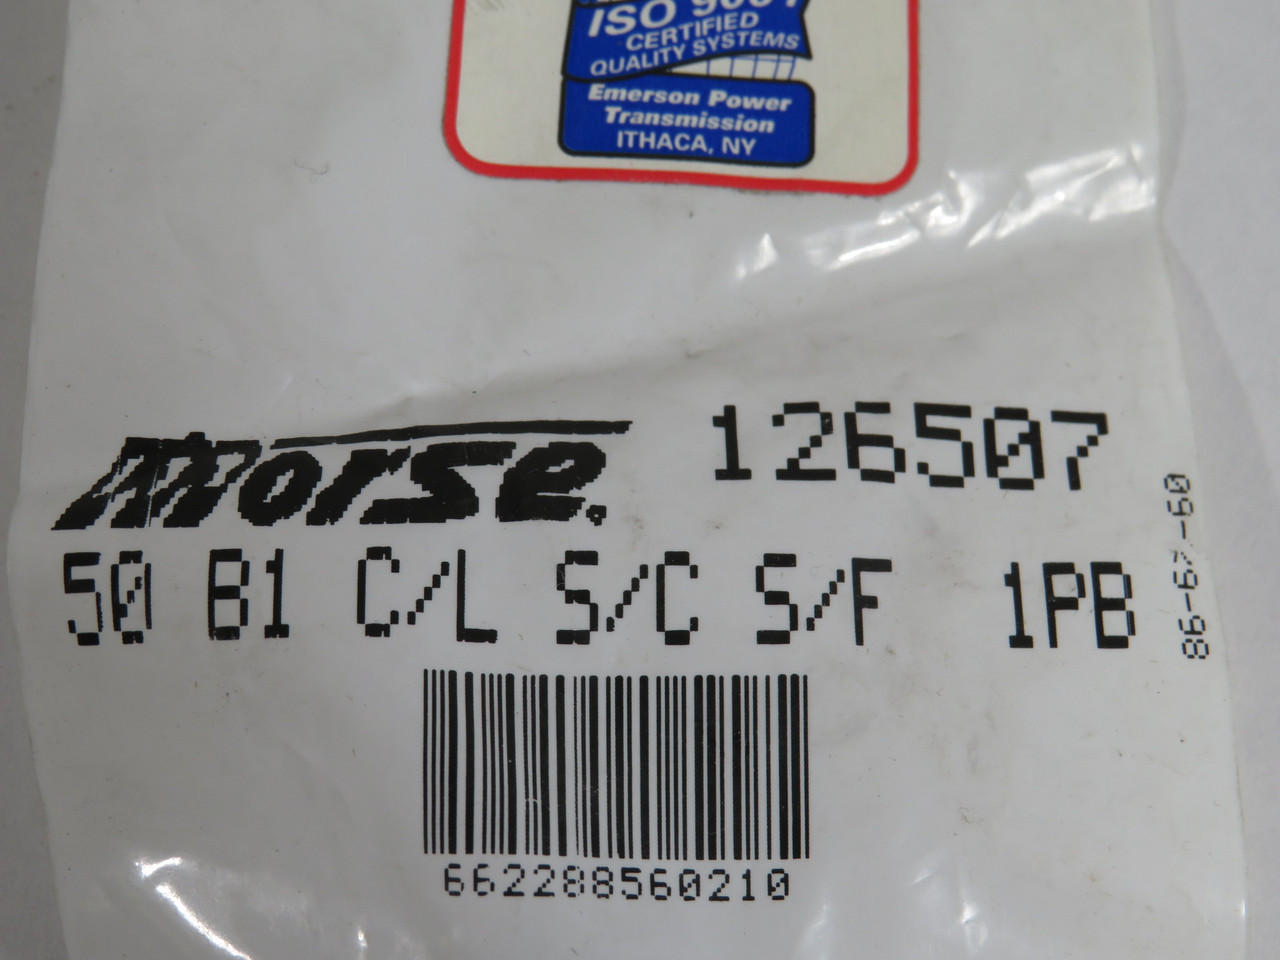 Morse 126507 Connecting Link 50 Chain Size B1 C/L S/C S/F NWB